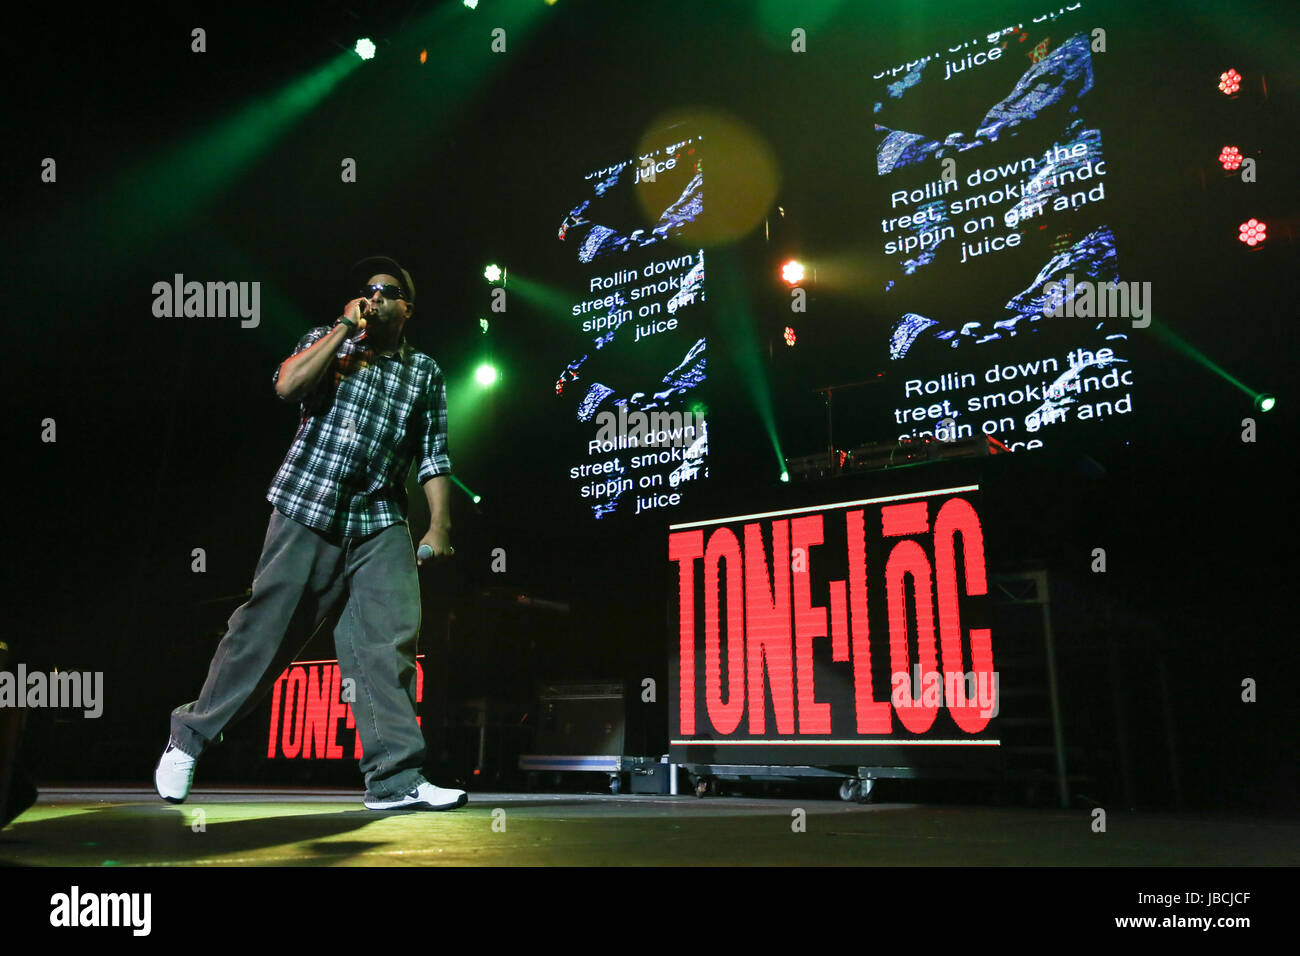 Sydney, NSW, Australia. 9th June, 2017. Tone Loc performing at the I Love the 90's Tour at Qudos Bank Arena Sydney Credit: Christopher Khoury/Australian Press/ZUMA Wire/Alamy Live News Stock Photo